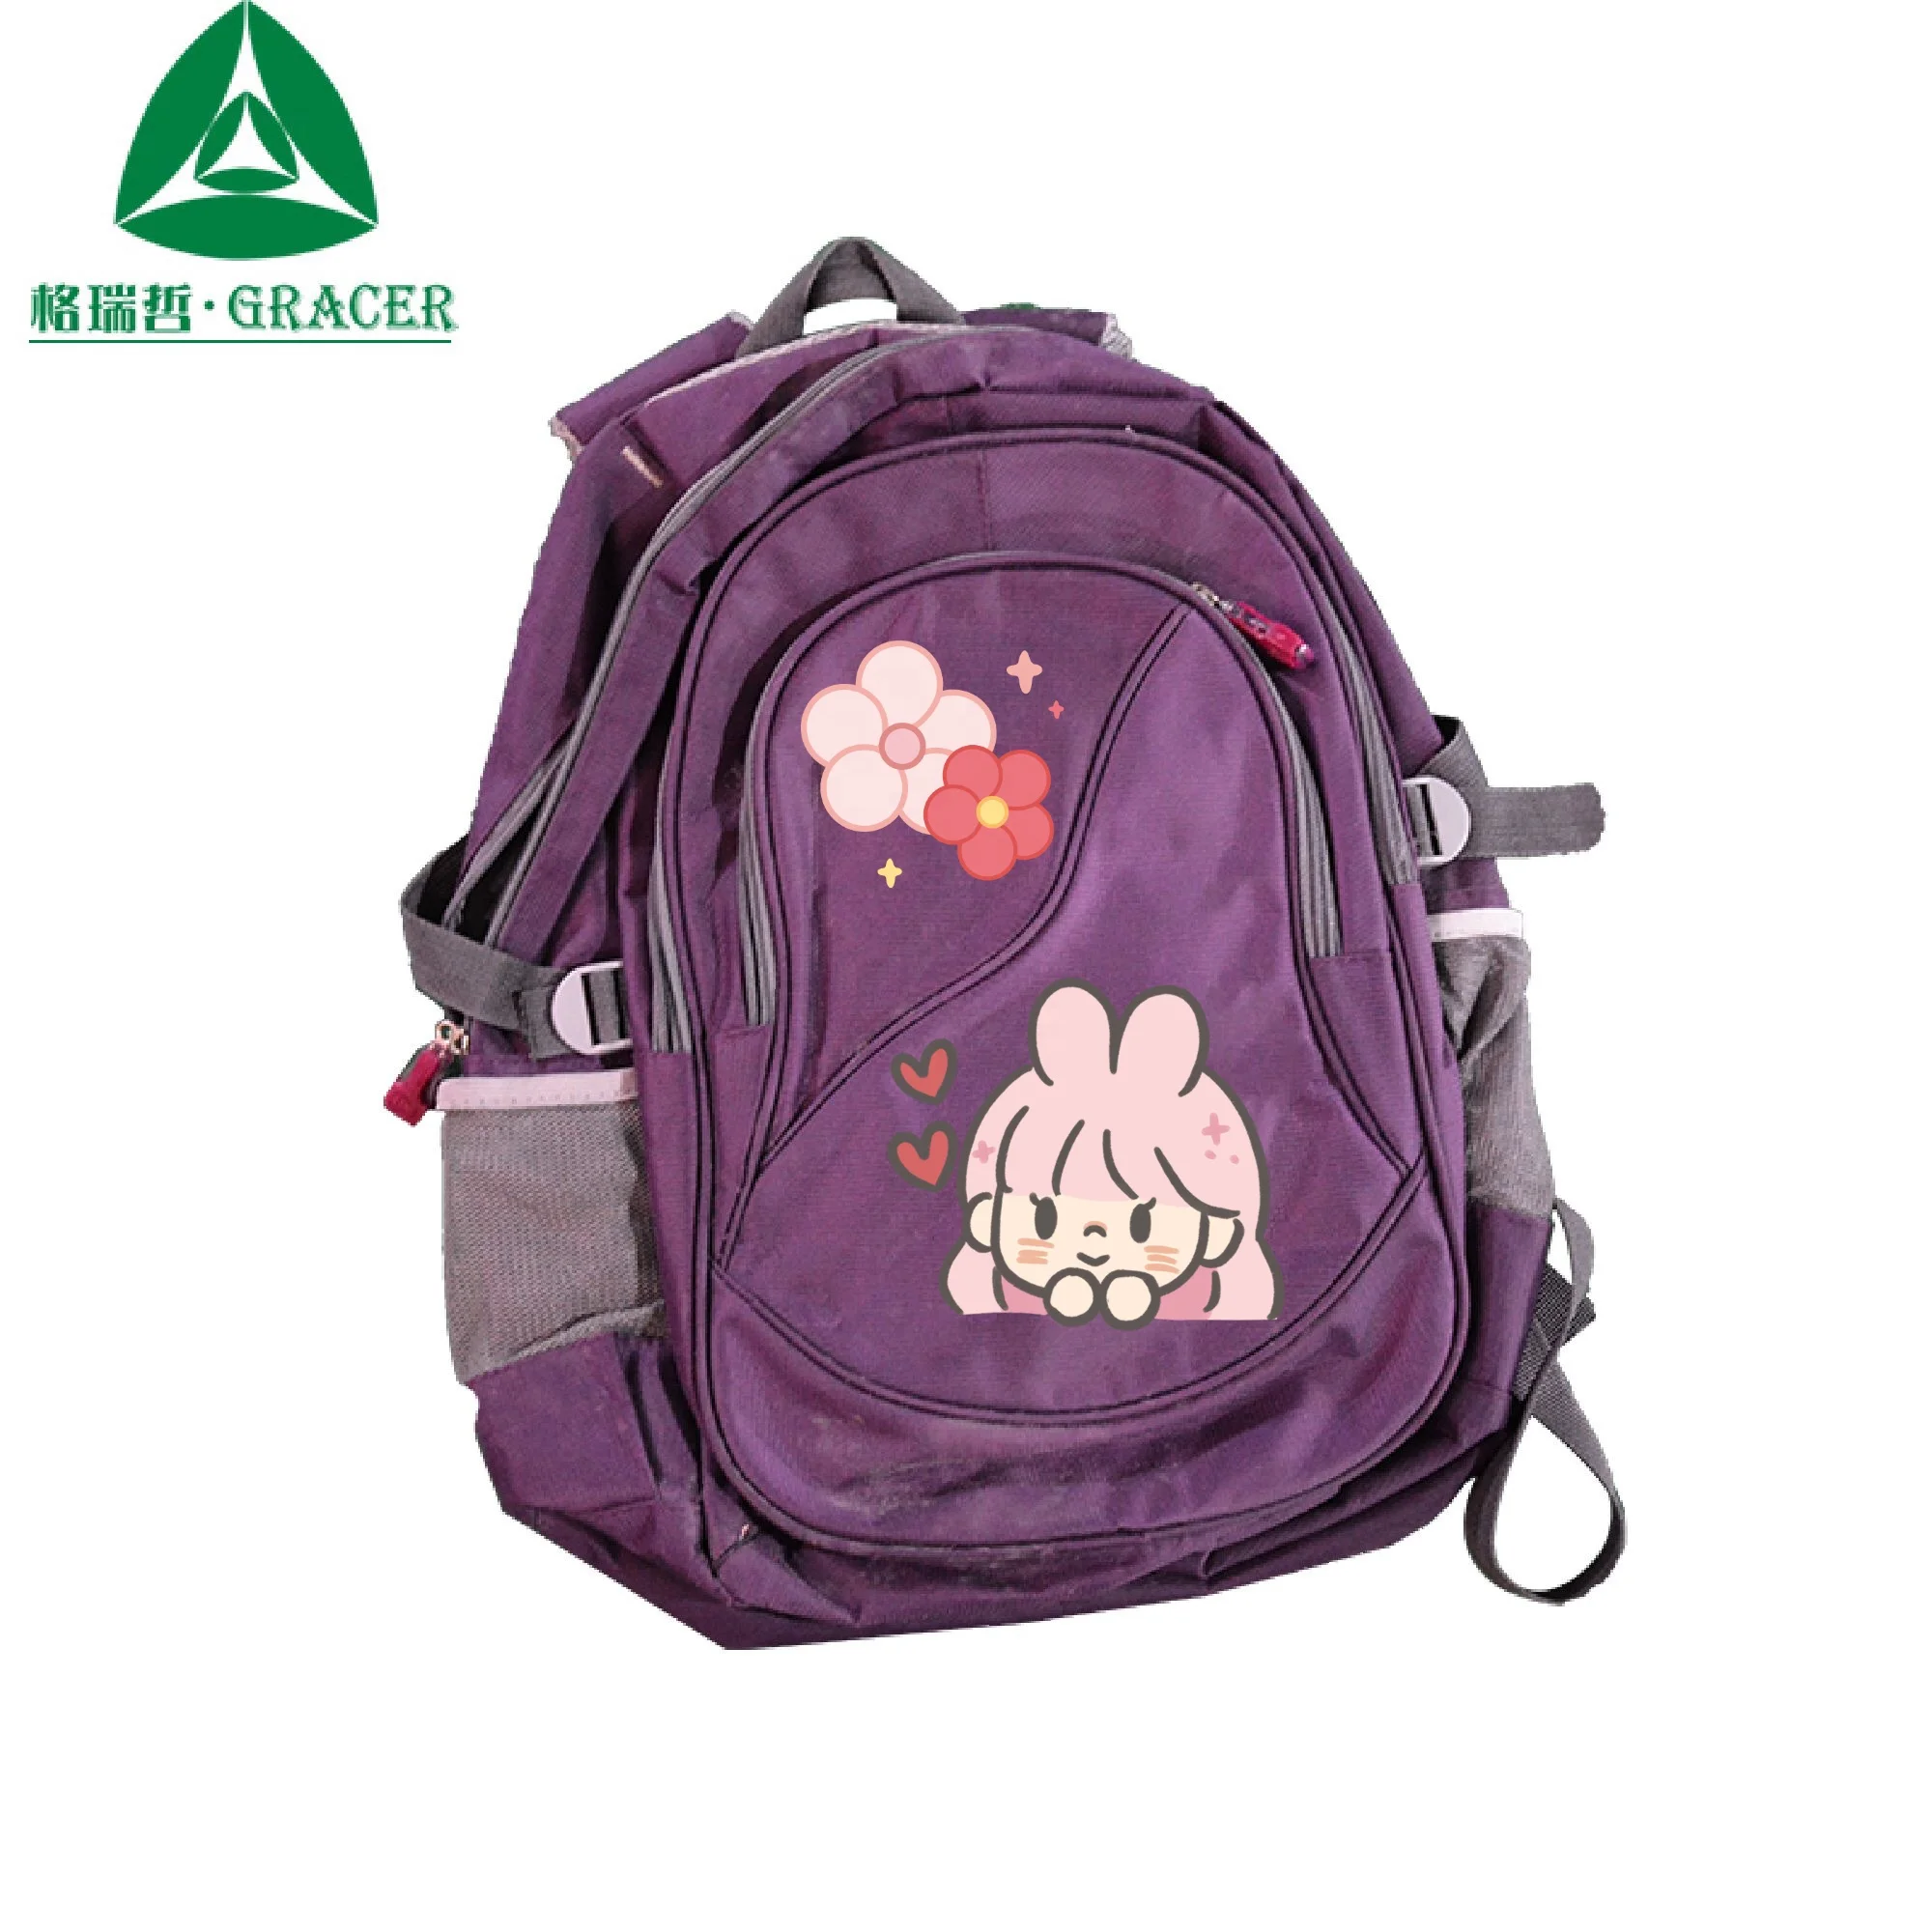 Wholesale 30kg Bale Of Second Hand School Bags Wholesale Used Bags